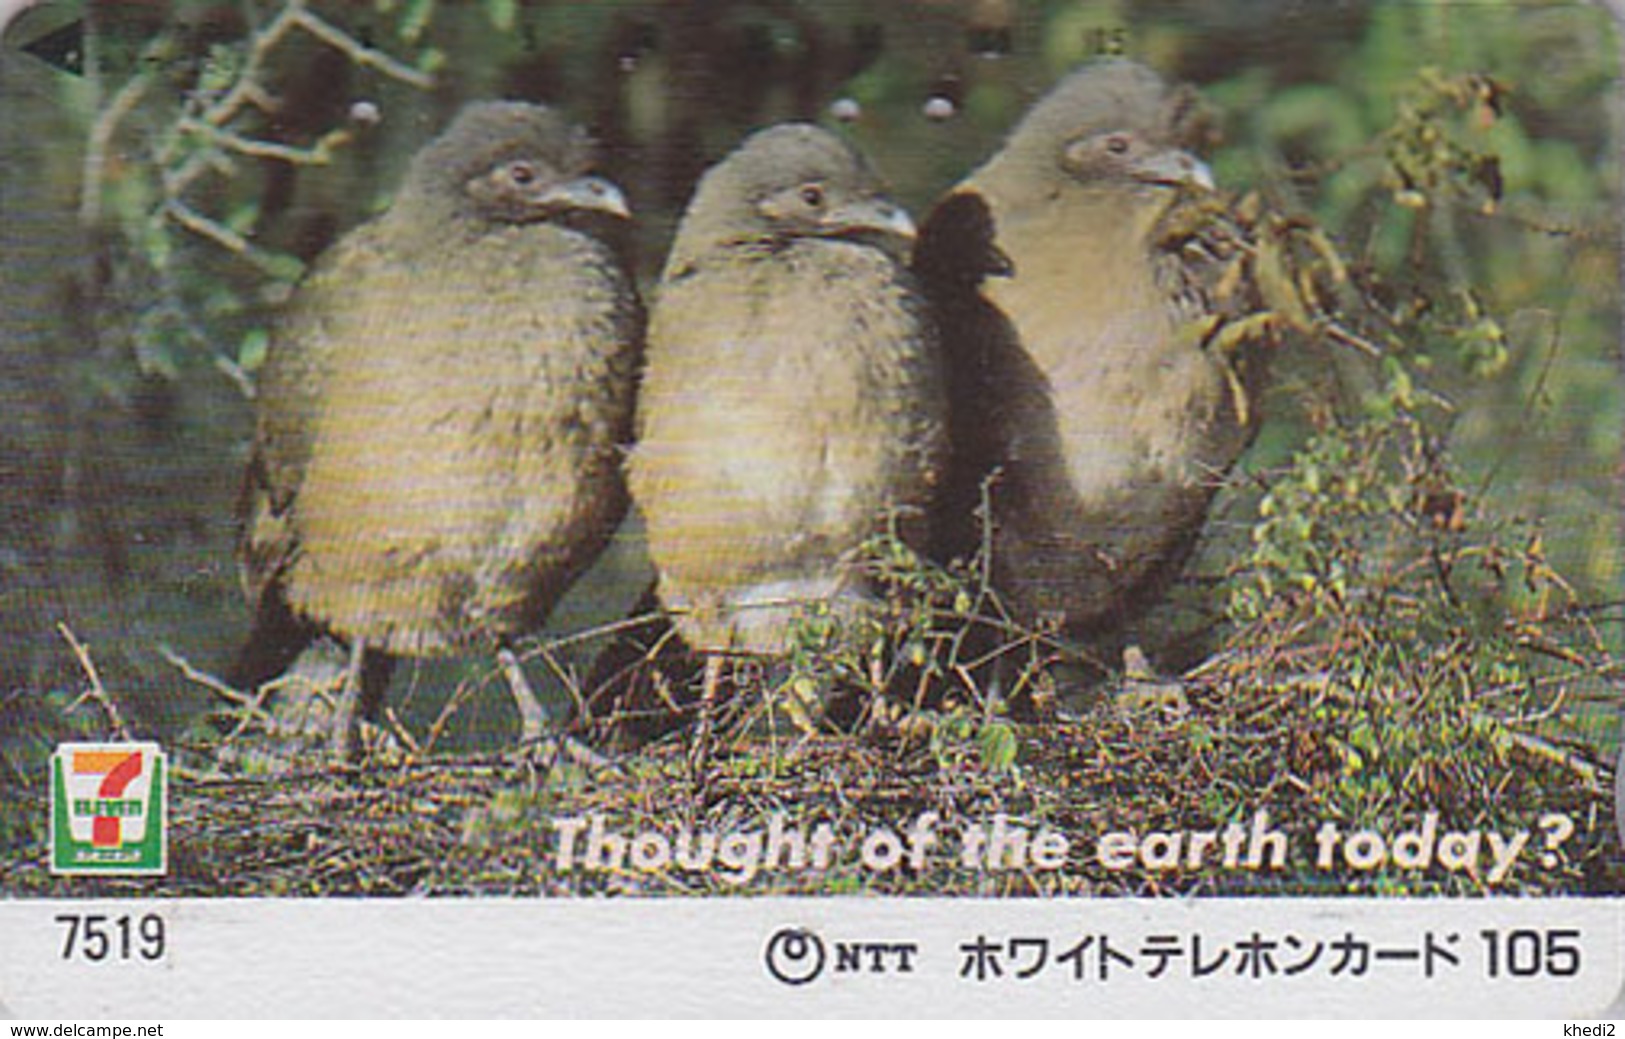 Télécarte JAPON / SERIE 7/11 - 7519 TBE - THOUGHT OF THE EARTH TODAY - ANIMAL - OISEAU - BIRD JAPAN Phonecard - Vogel BE - Passereaux